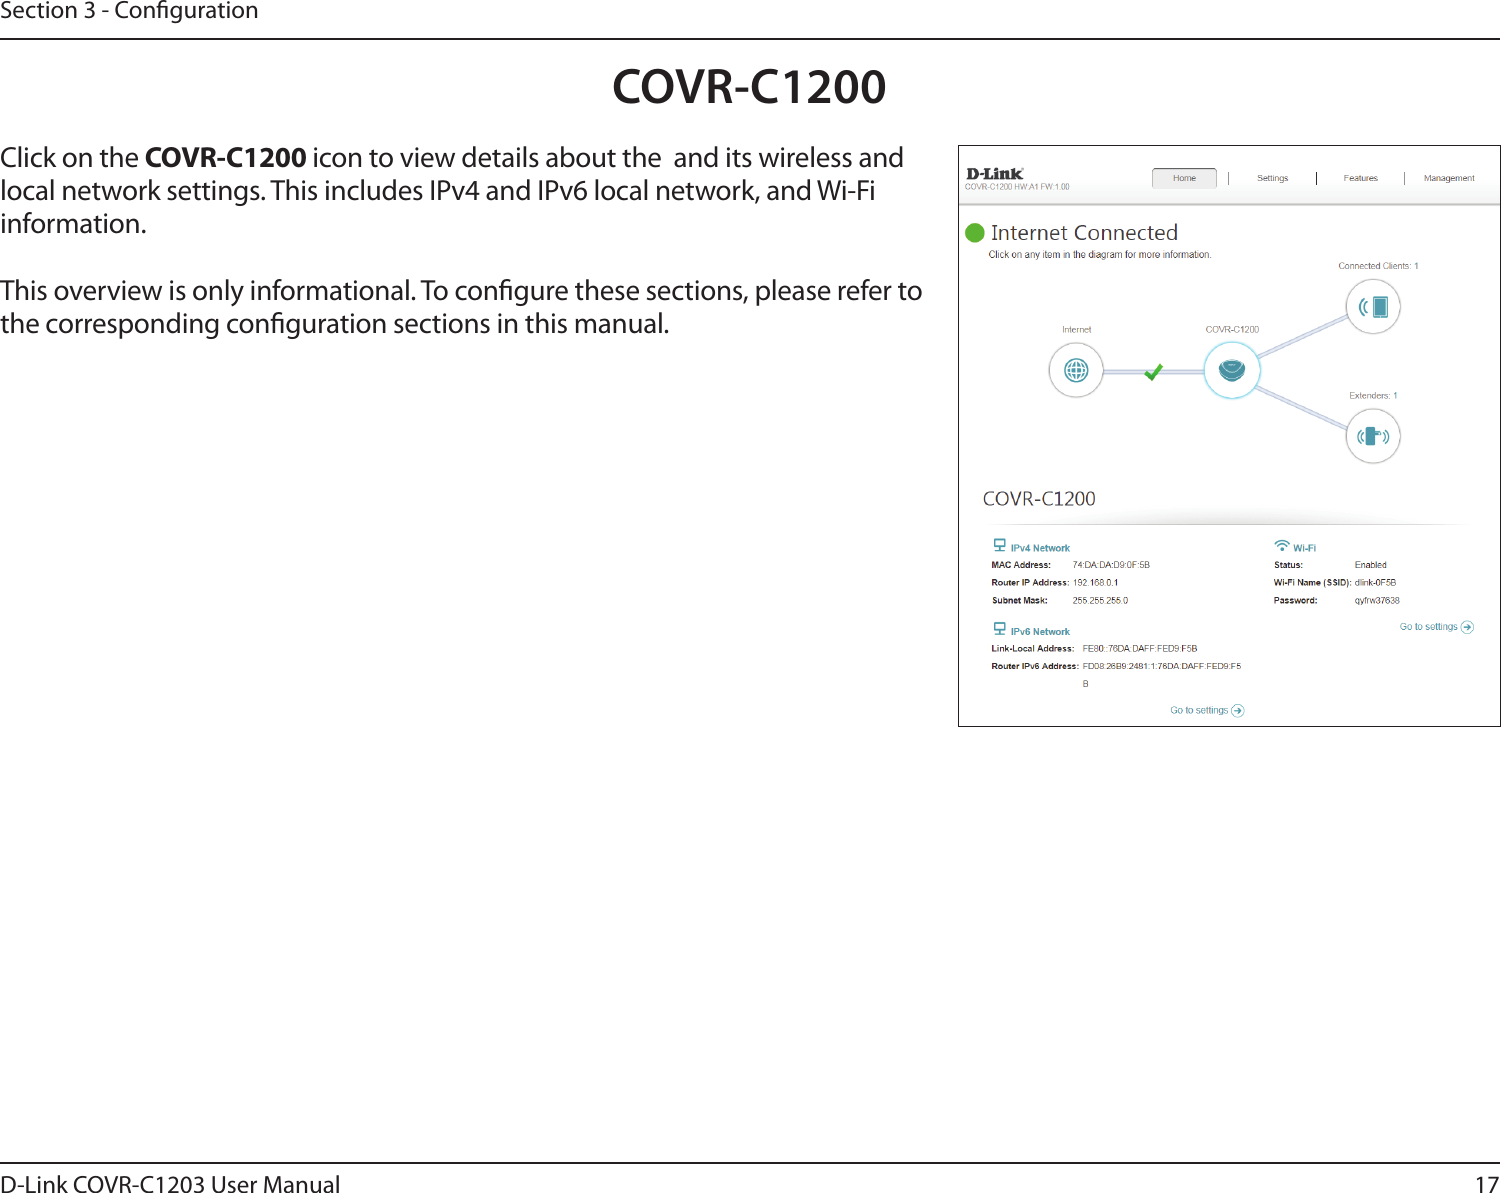 17D-Link COVR-C1203 User ManualSection 3 - CongurationCOVR-C1200Click on the COVR-C1200 icon to view details about the  and its wireless and local network settings. This includes IPv4 and IPv6 local network, and Wi-Fi information.This overview is only informational. To congure these sections, please refer to the corresponding conguration sections in this manual.